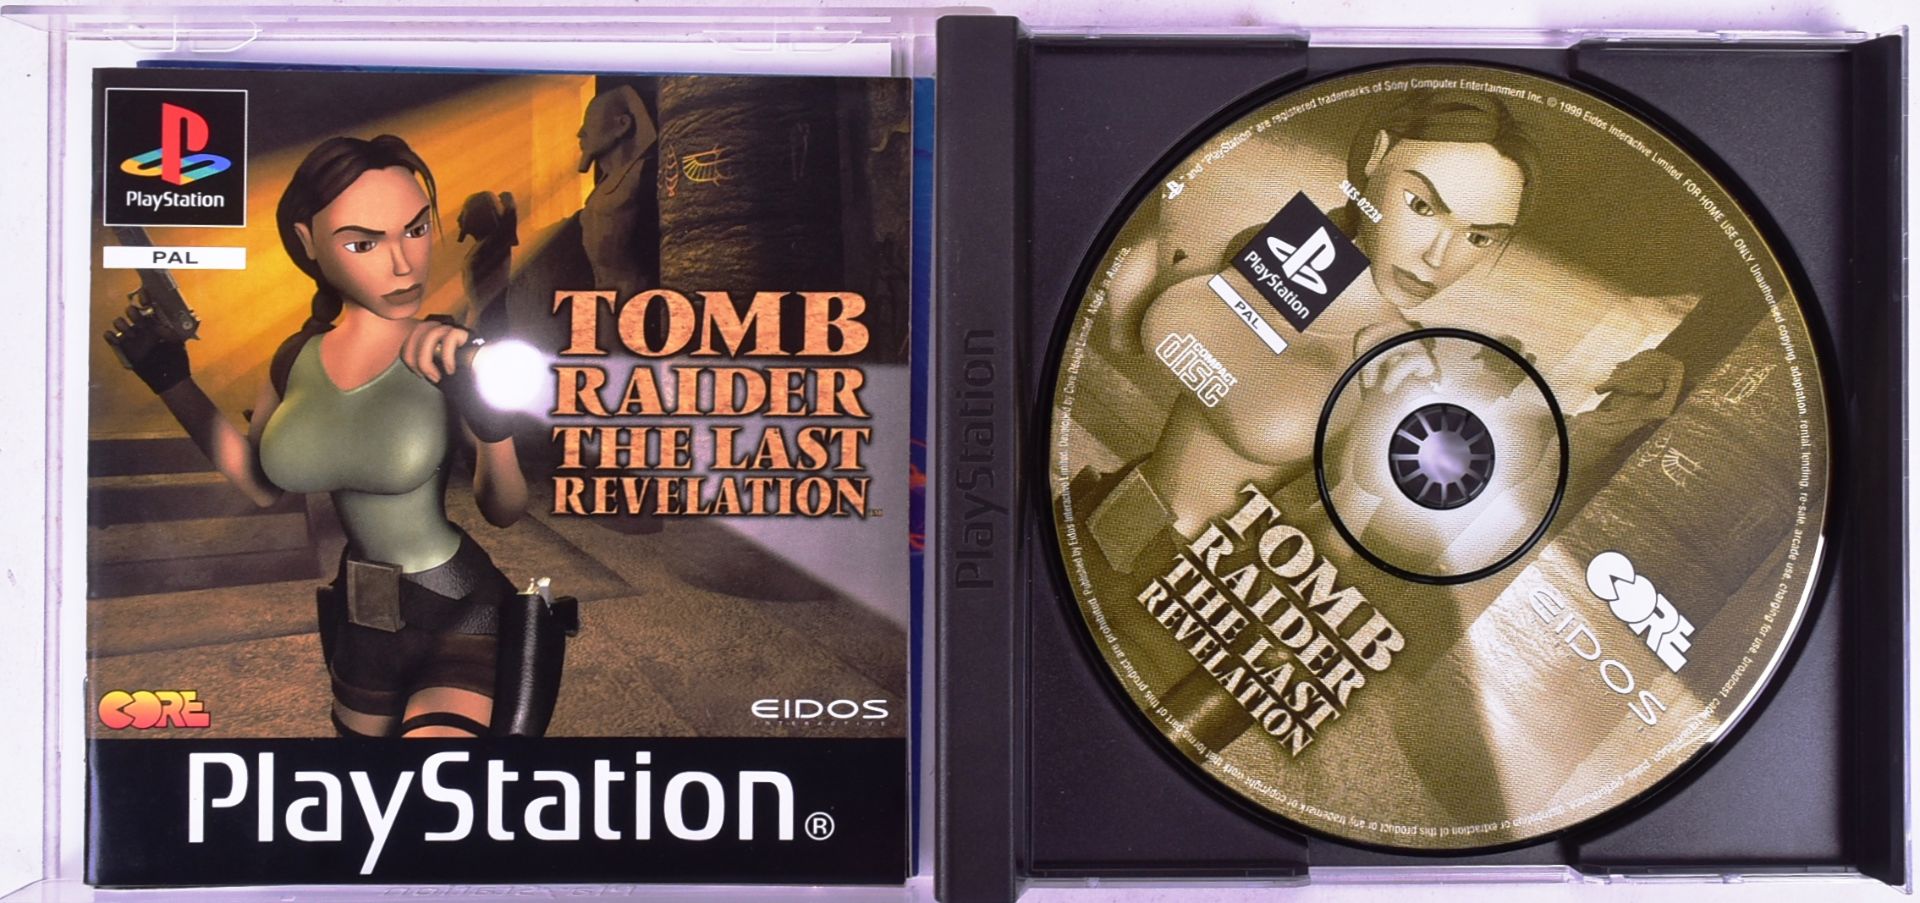 RETRO GAMING - PLAYSTATION ONE - X5 TOMB RAIDER GAMES - Image 4 of 5